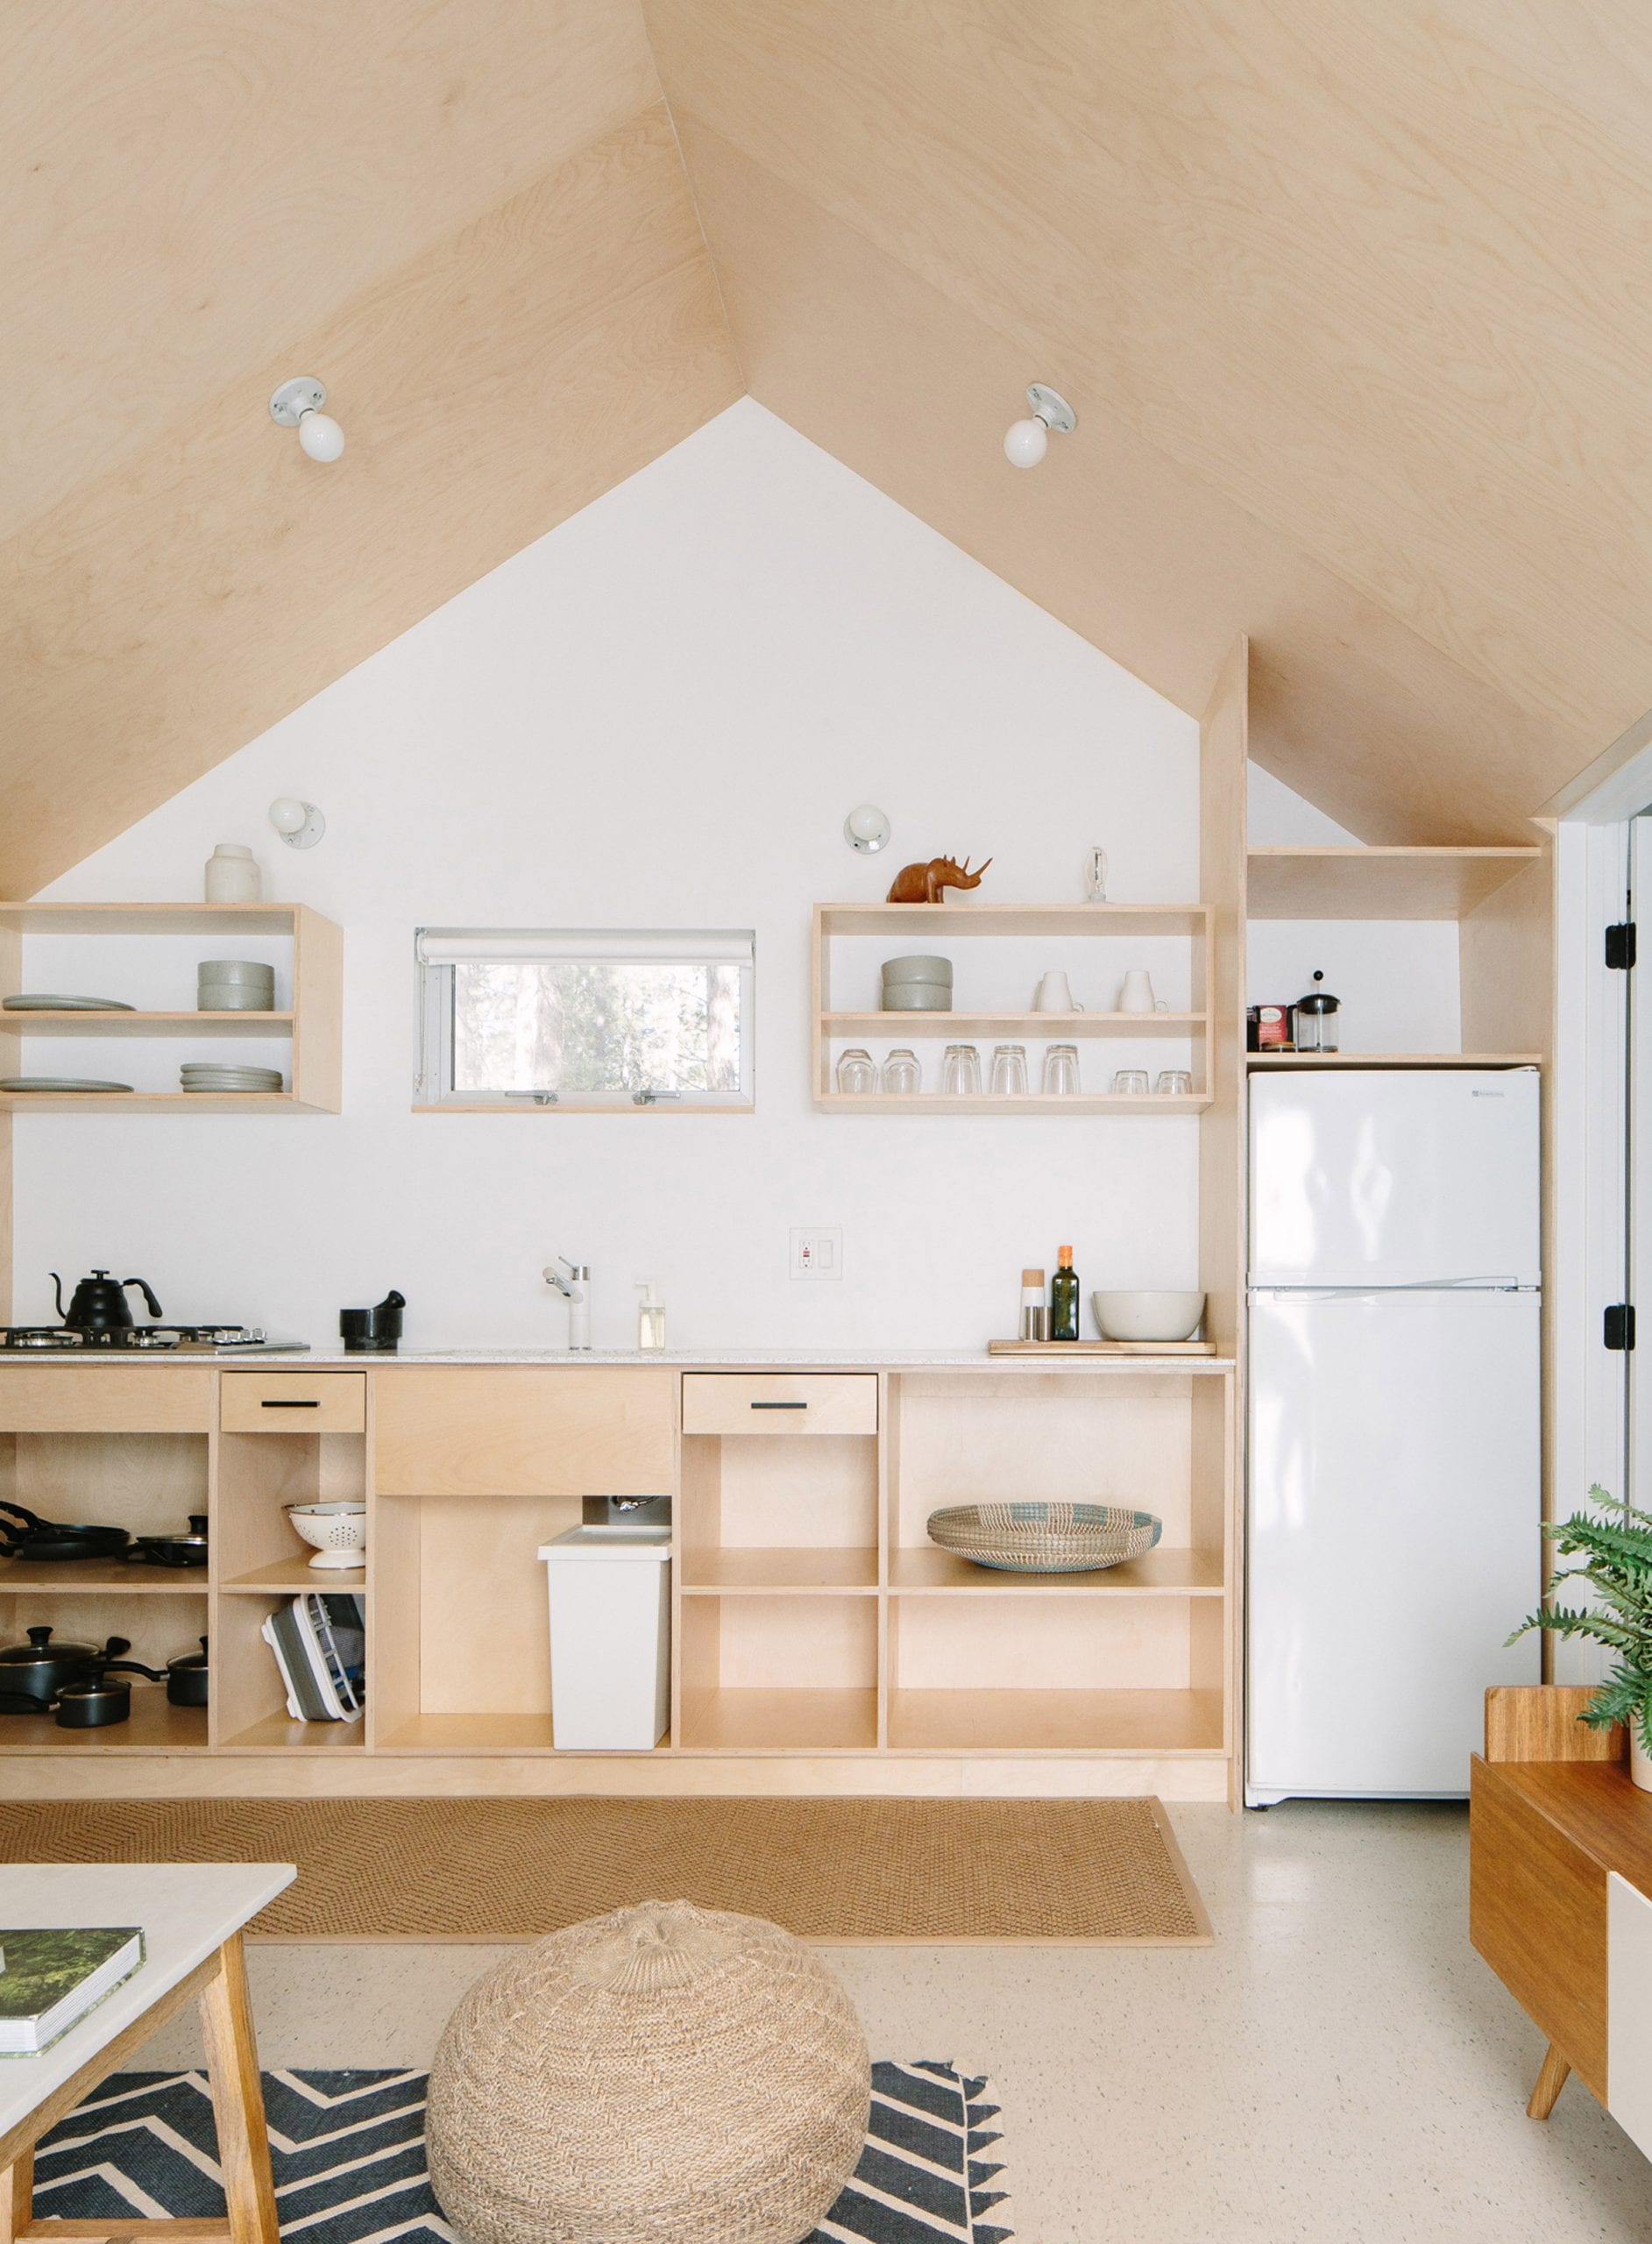 Plywood one-wall kitchen by Sheet/RockLA 